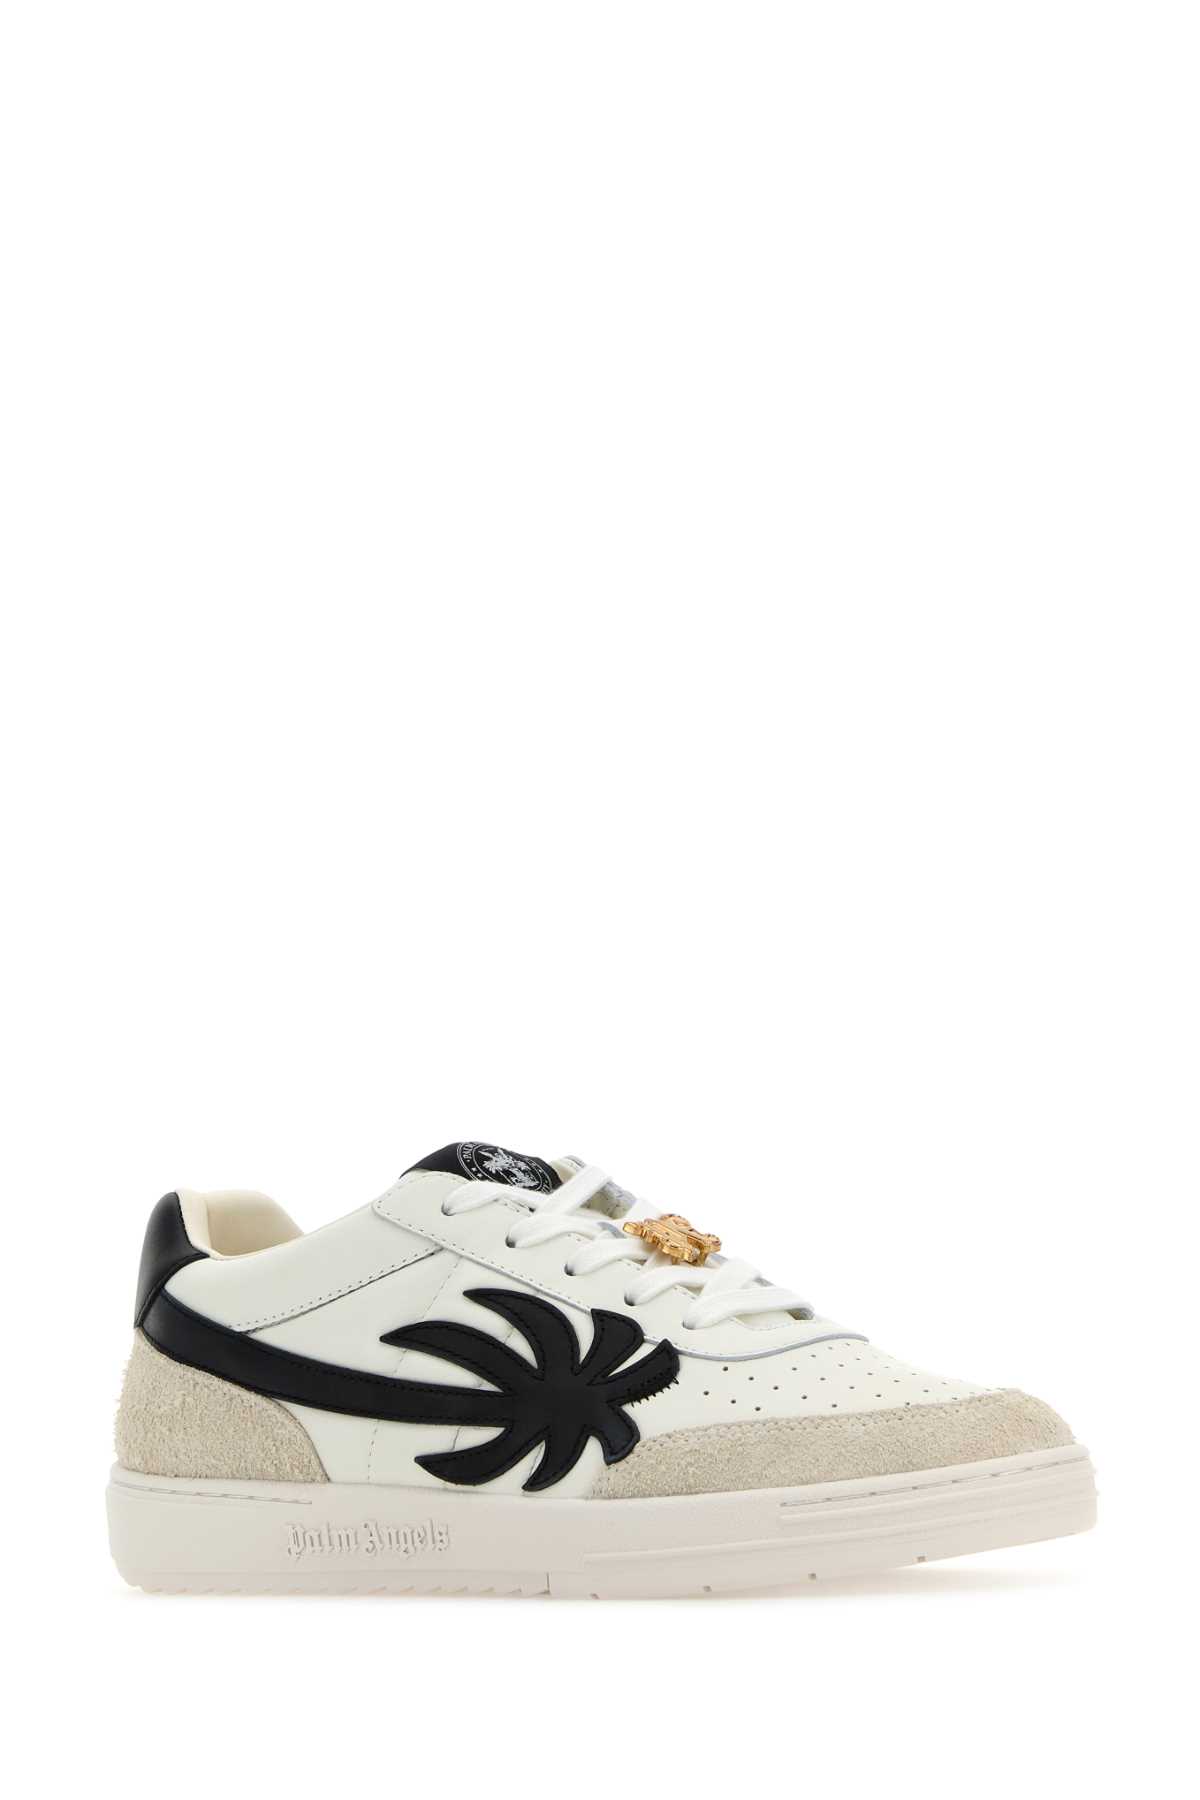 PALM ANGELS MULTICOLOR LEATHER PALM BEACH UNIVERSITY SNEAKERS